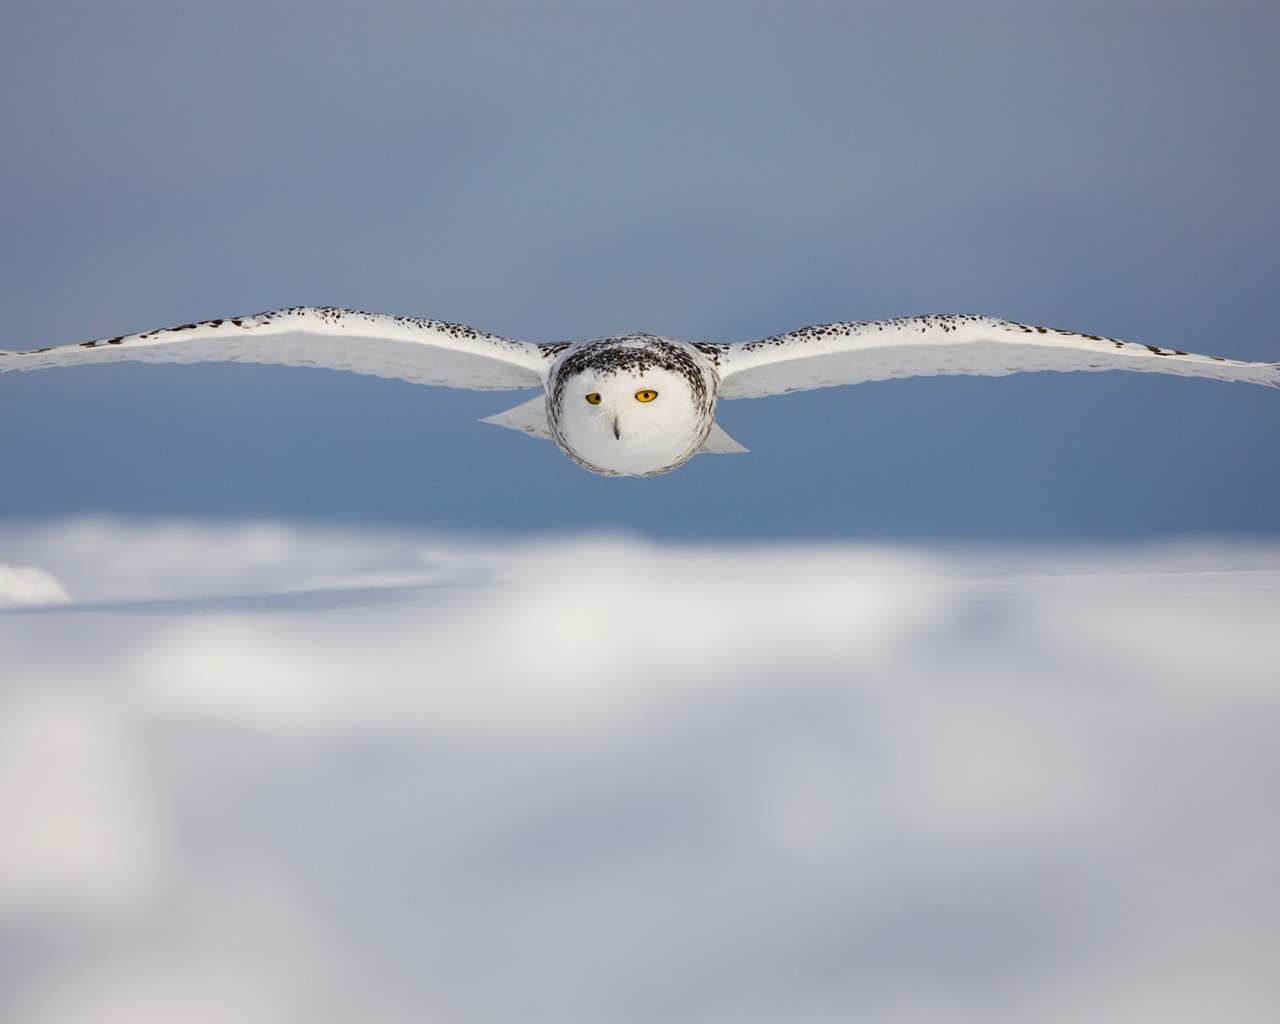 Windows 8 Wallpapers: Arctic, the nature ecological landscape, arctic animals #12 - 1280x1024